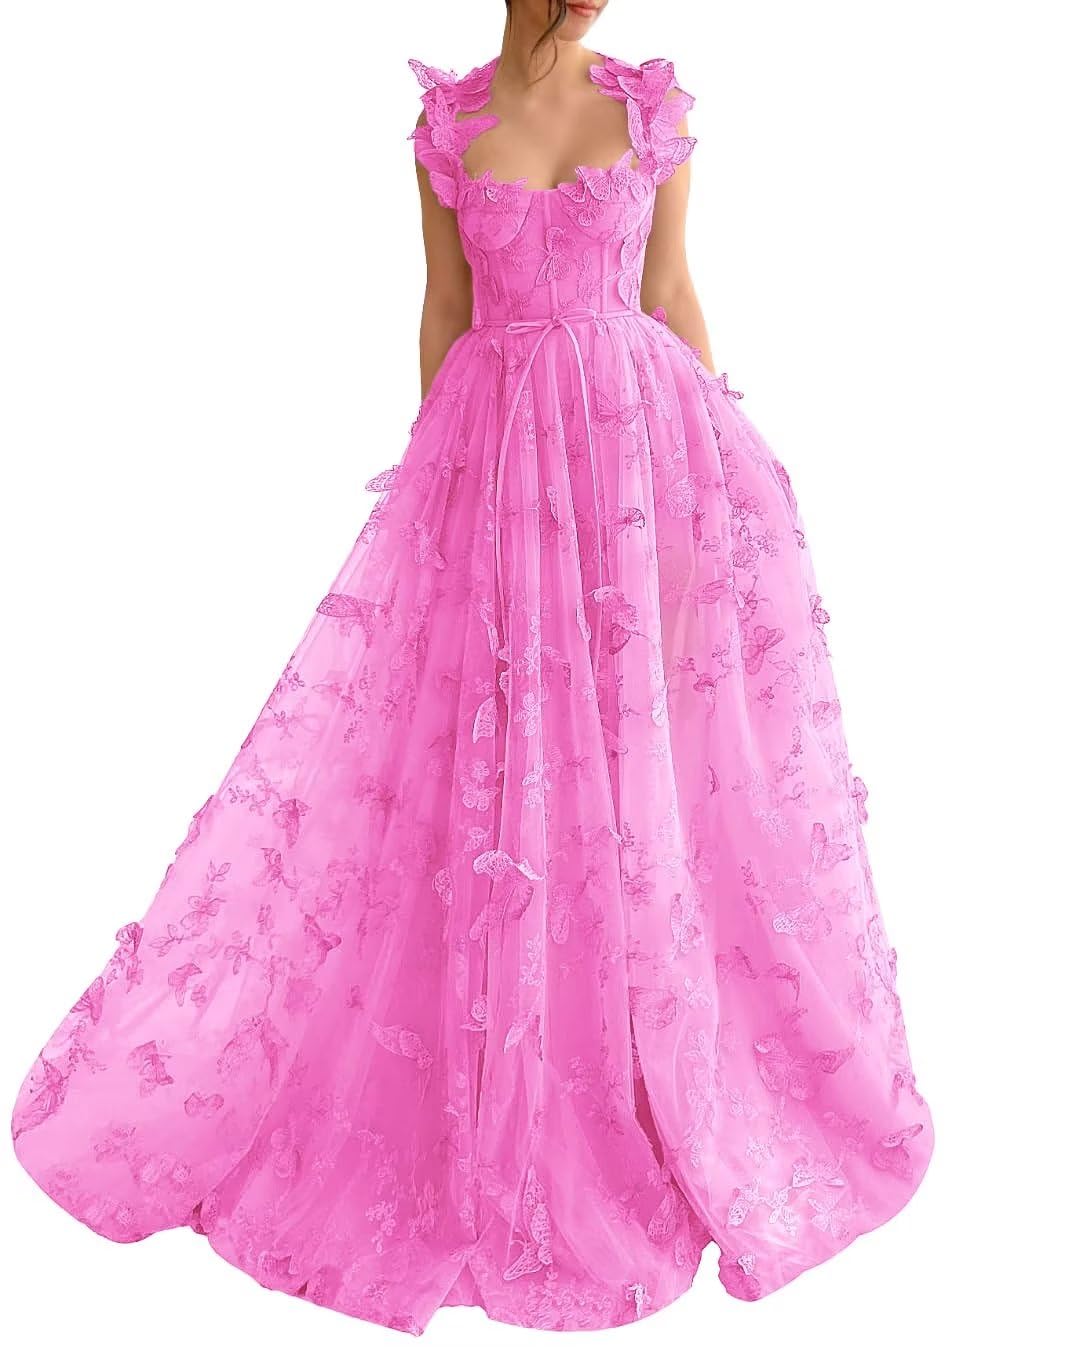 Long Tulle Prom Dress with 3D Butterflies Floor Length Formal Evening Party Gowns for Women